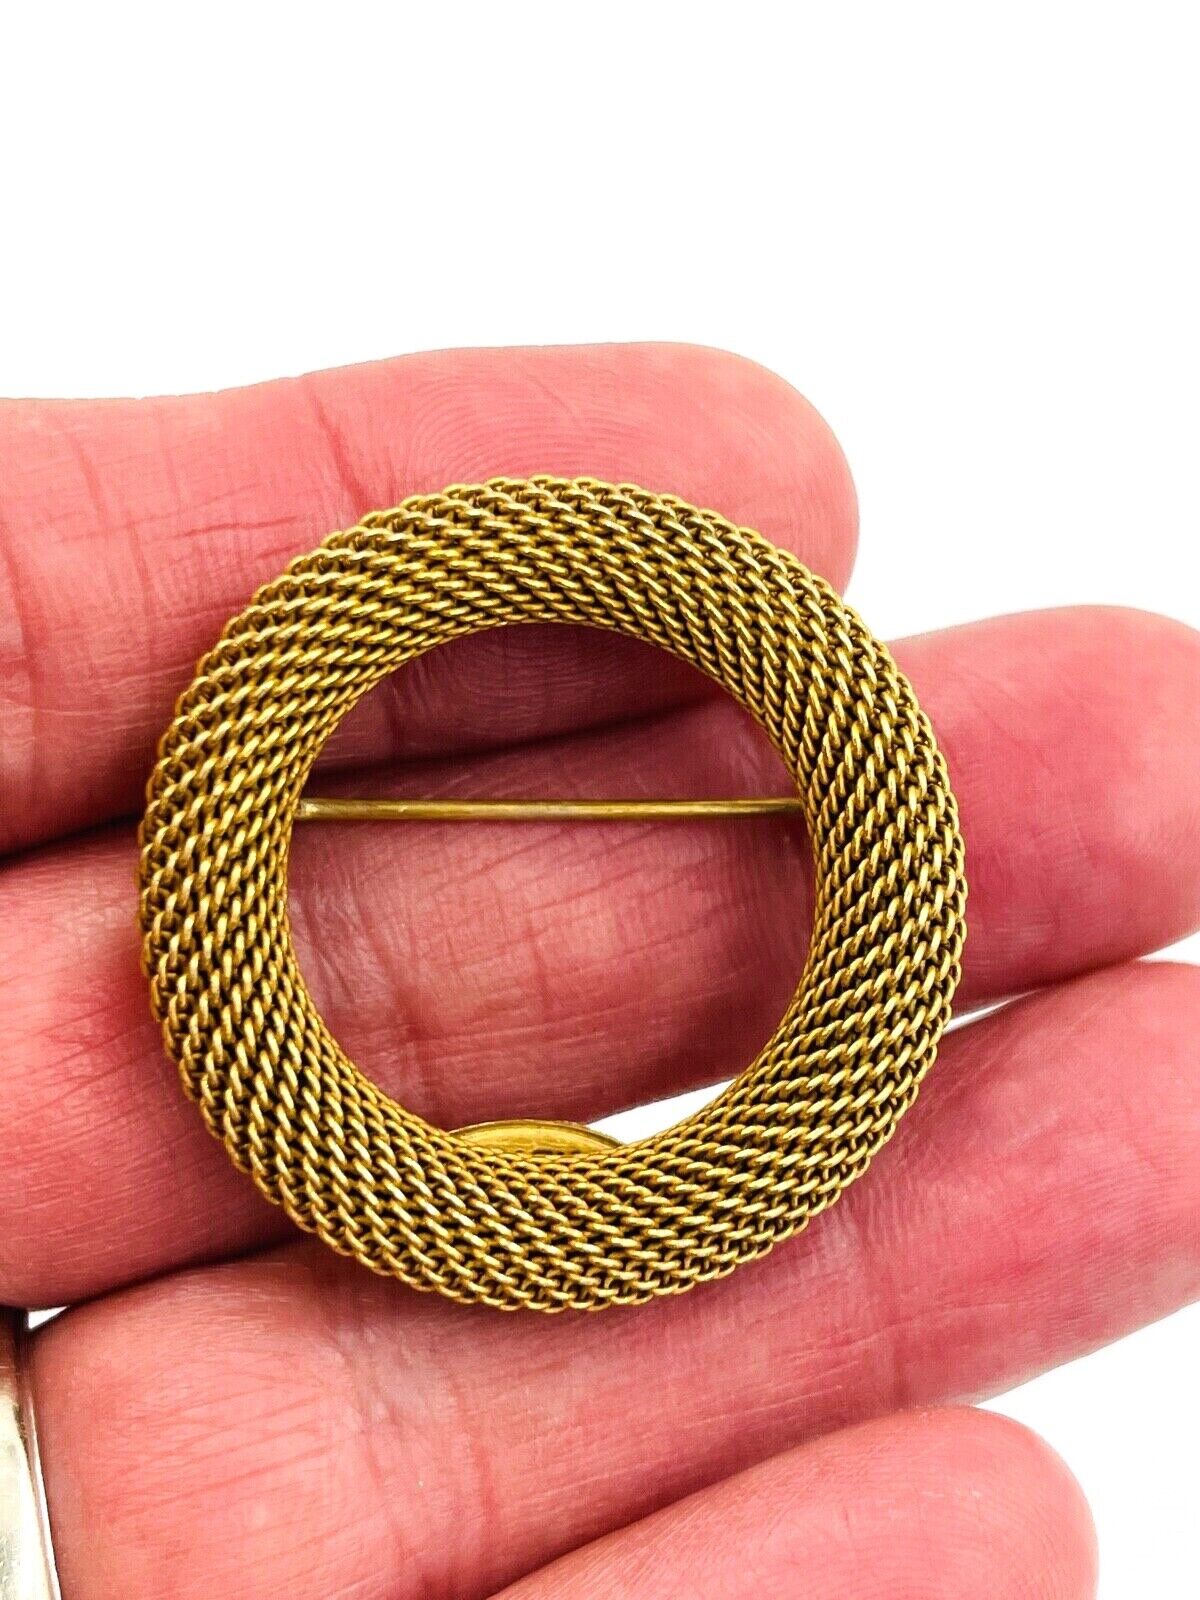 Vintage Miriam Haskell Signed Double Circle Mesh Brooch Pin